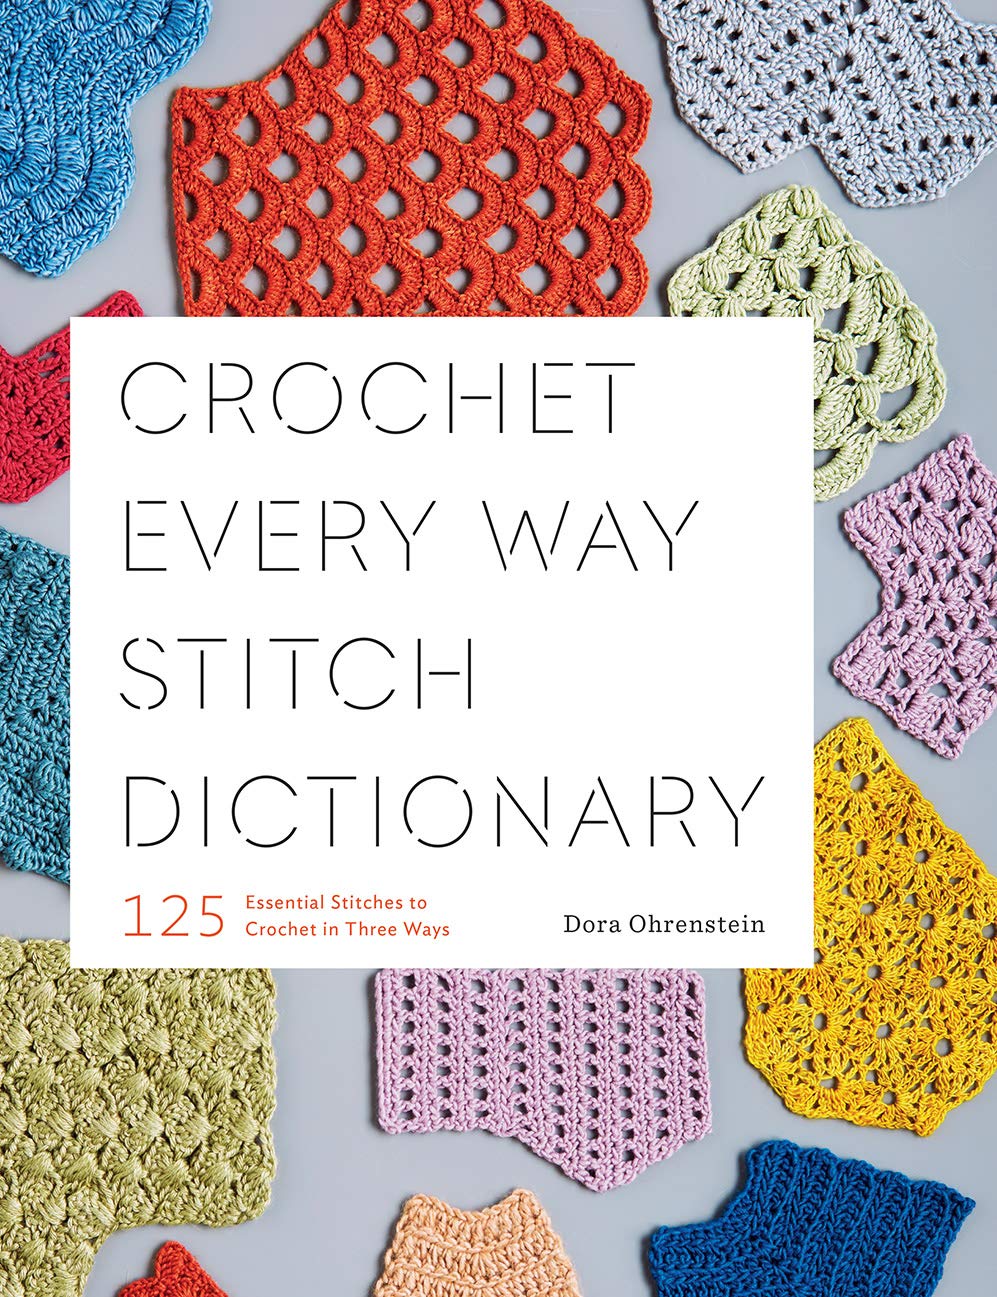 Crochet Every Way Stitch Dictionary: 125 Essential Stitches to Crochet